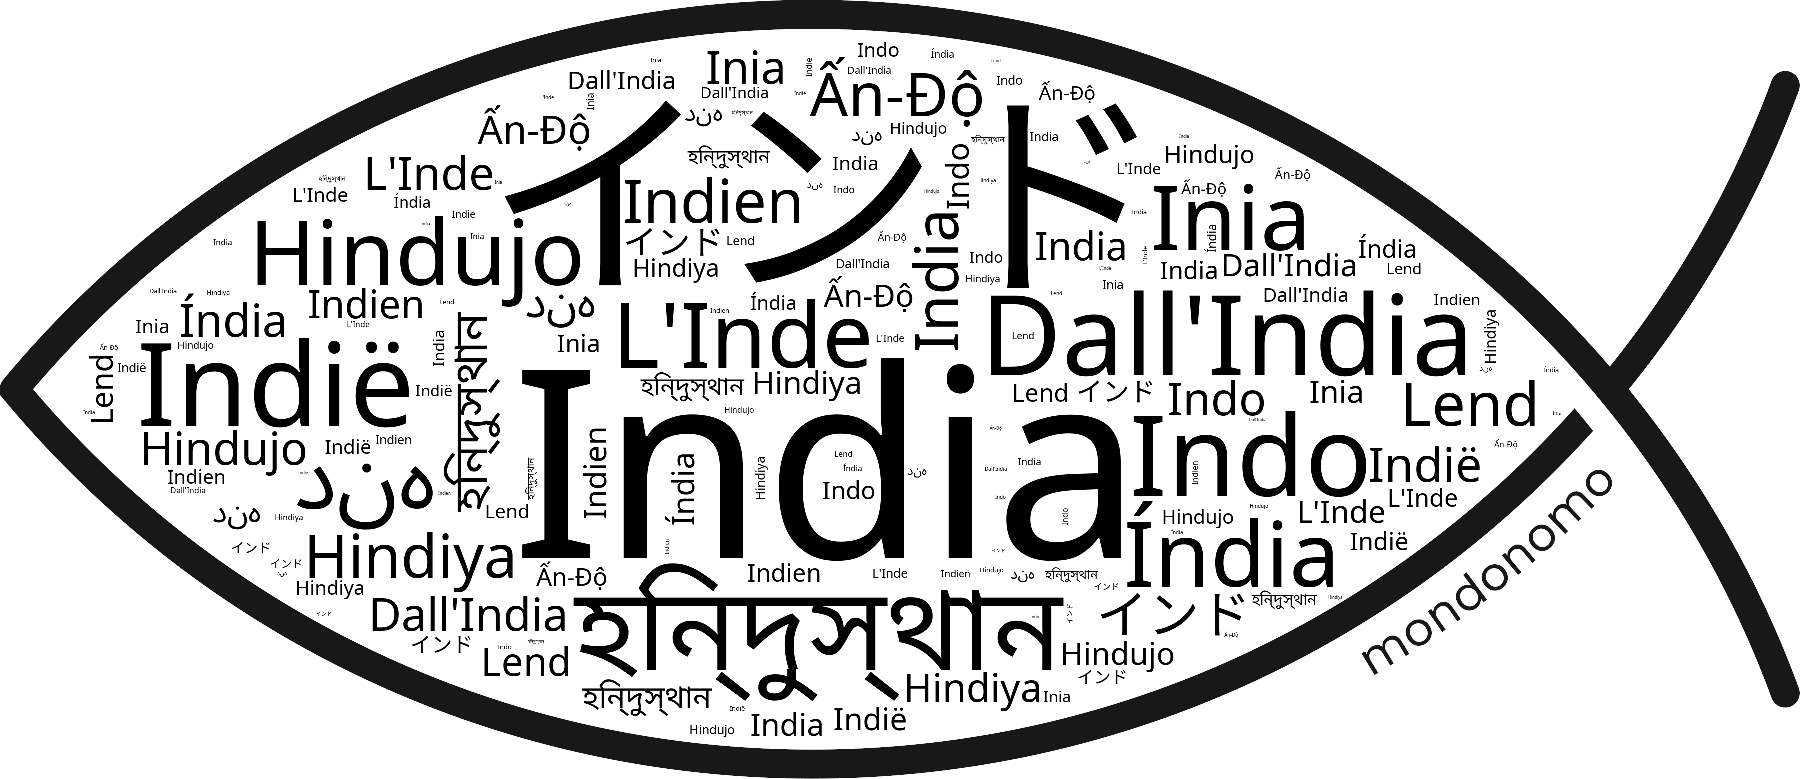 Name India in the world's Bibles